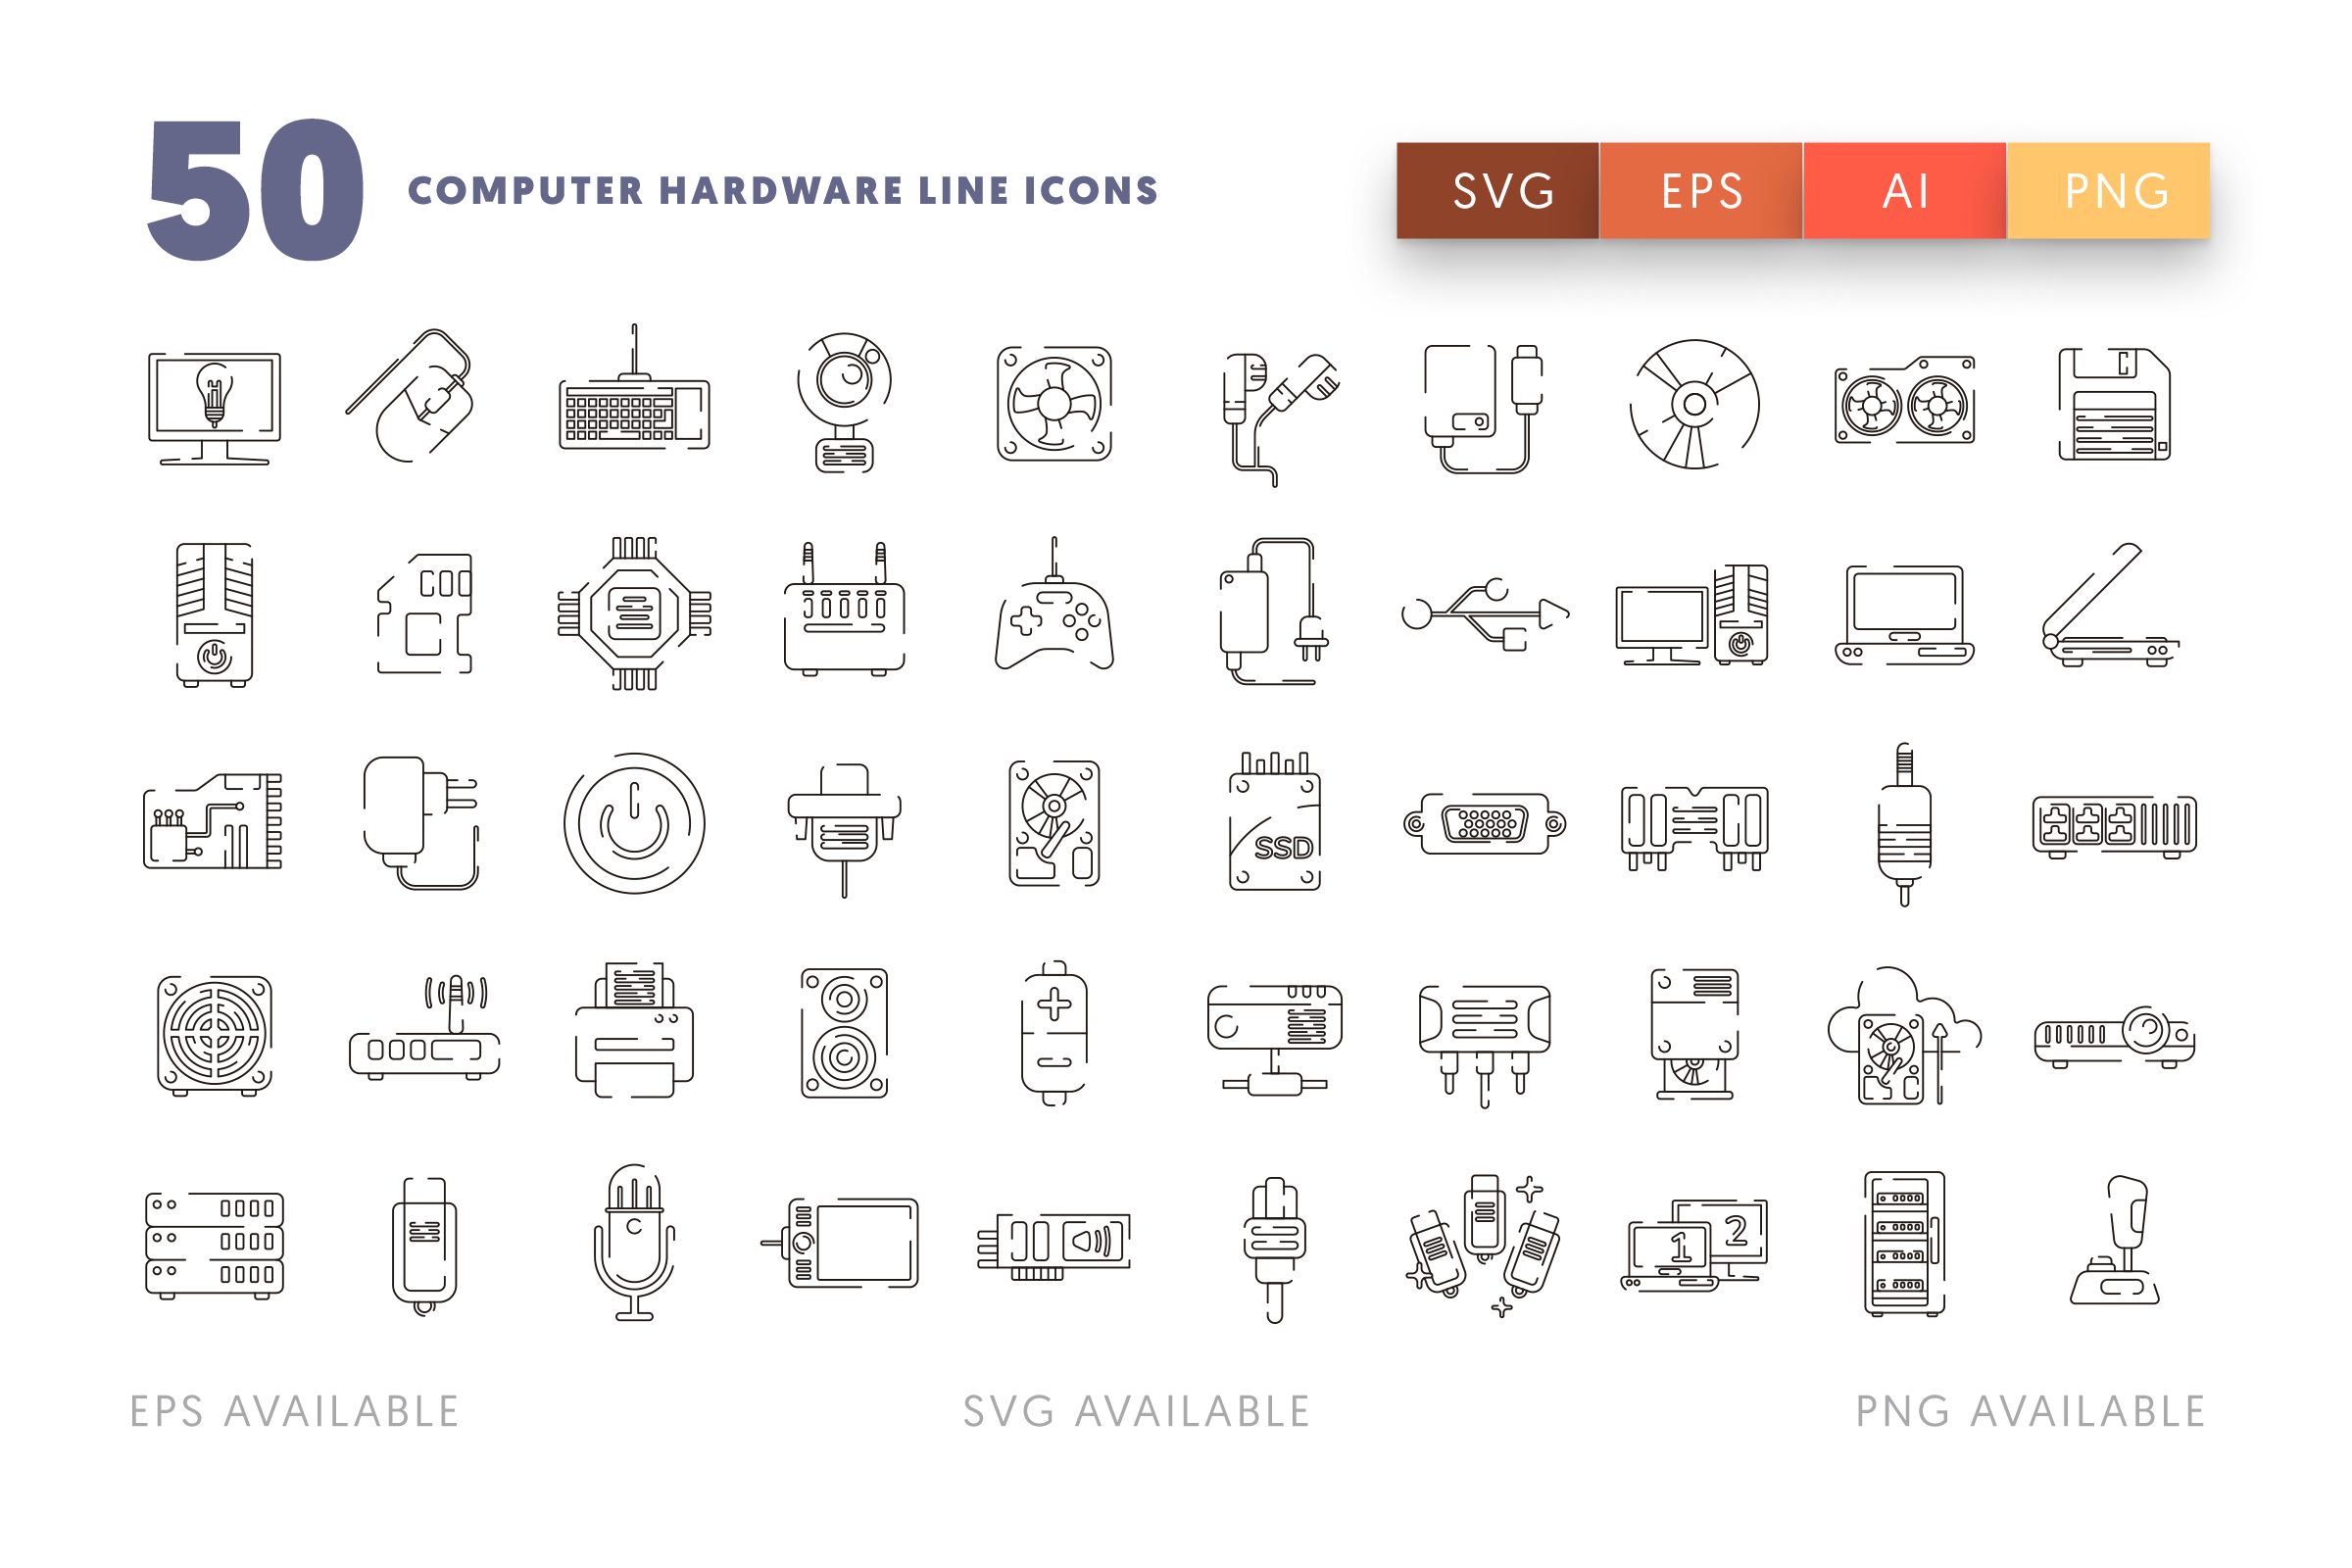 Computer Hardware Line icons png/svg/eps